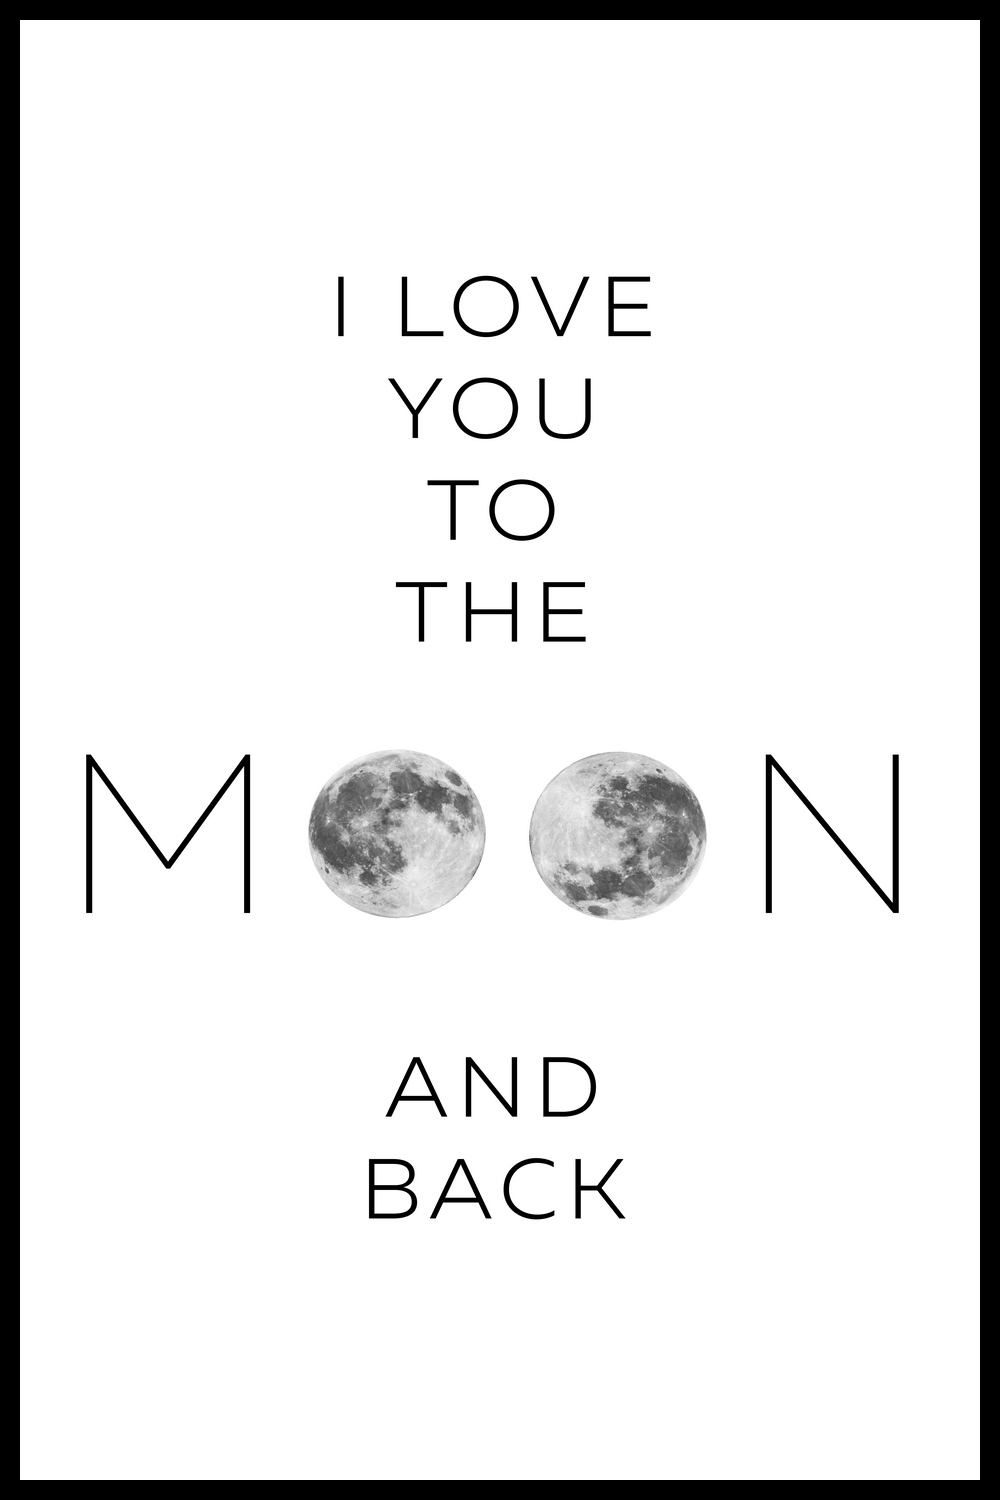 I love moon and back. Love you to the Moon and back. Надпись i Love you to the Moon and back. I Love you to the Moon открытка. I Love you to the Moon and back перевод.